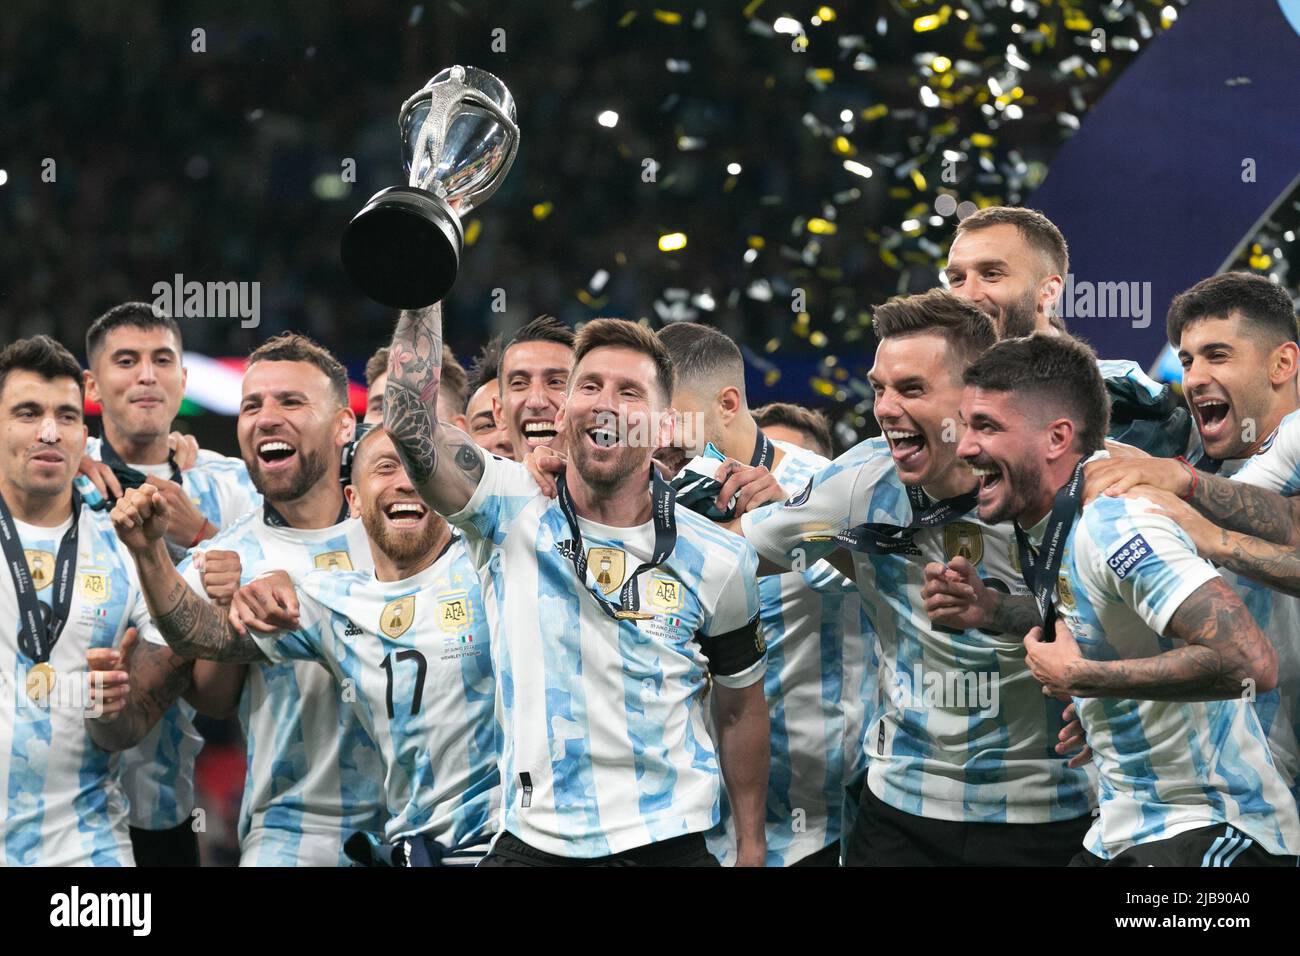 Lionel Messi (c) of Argentina lifts the cup and celebrates with his team mates after the Italy v Argentina - Finalissima 2022 match at Wembley Stadium on June 1, 2022 in London, England.(MB Media) Stock Photo